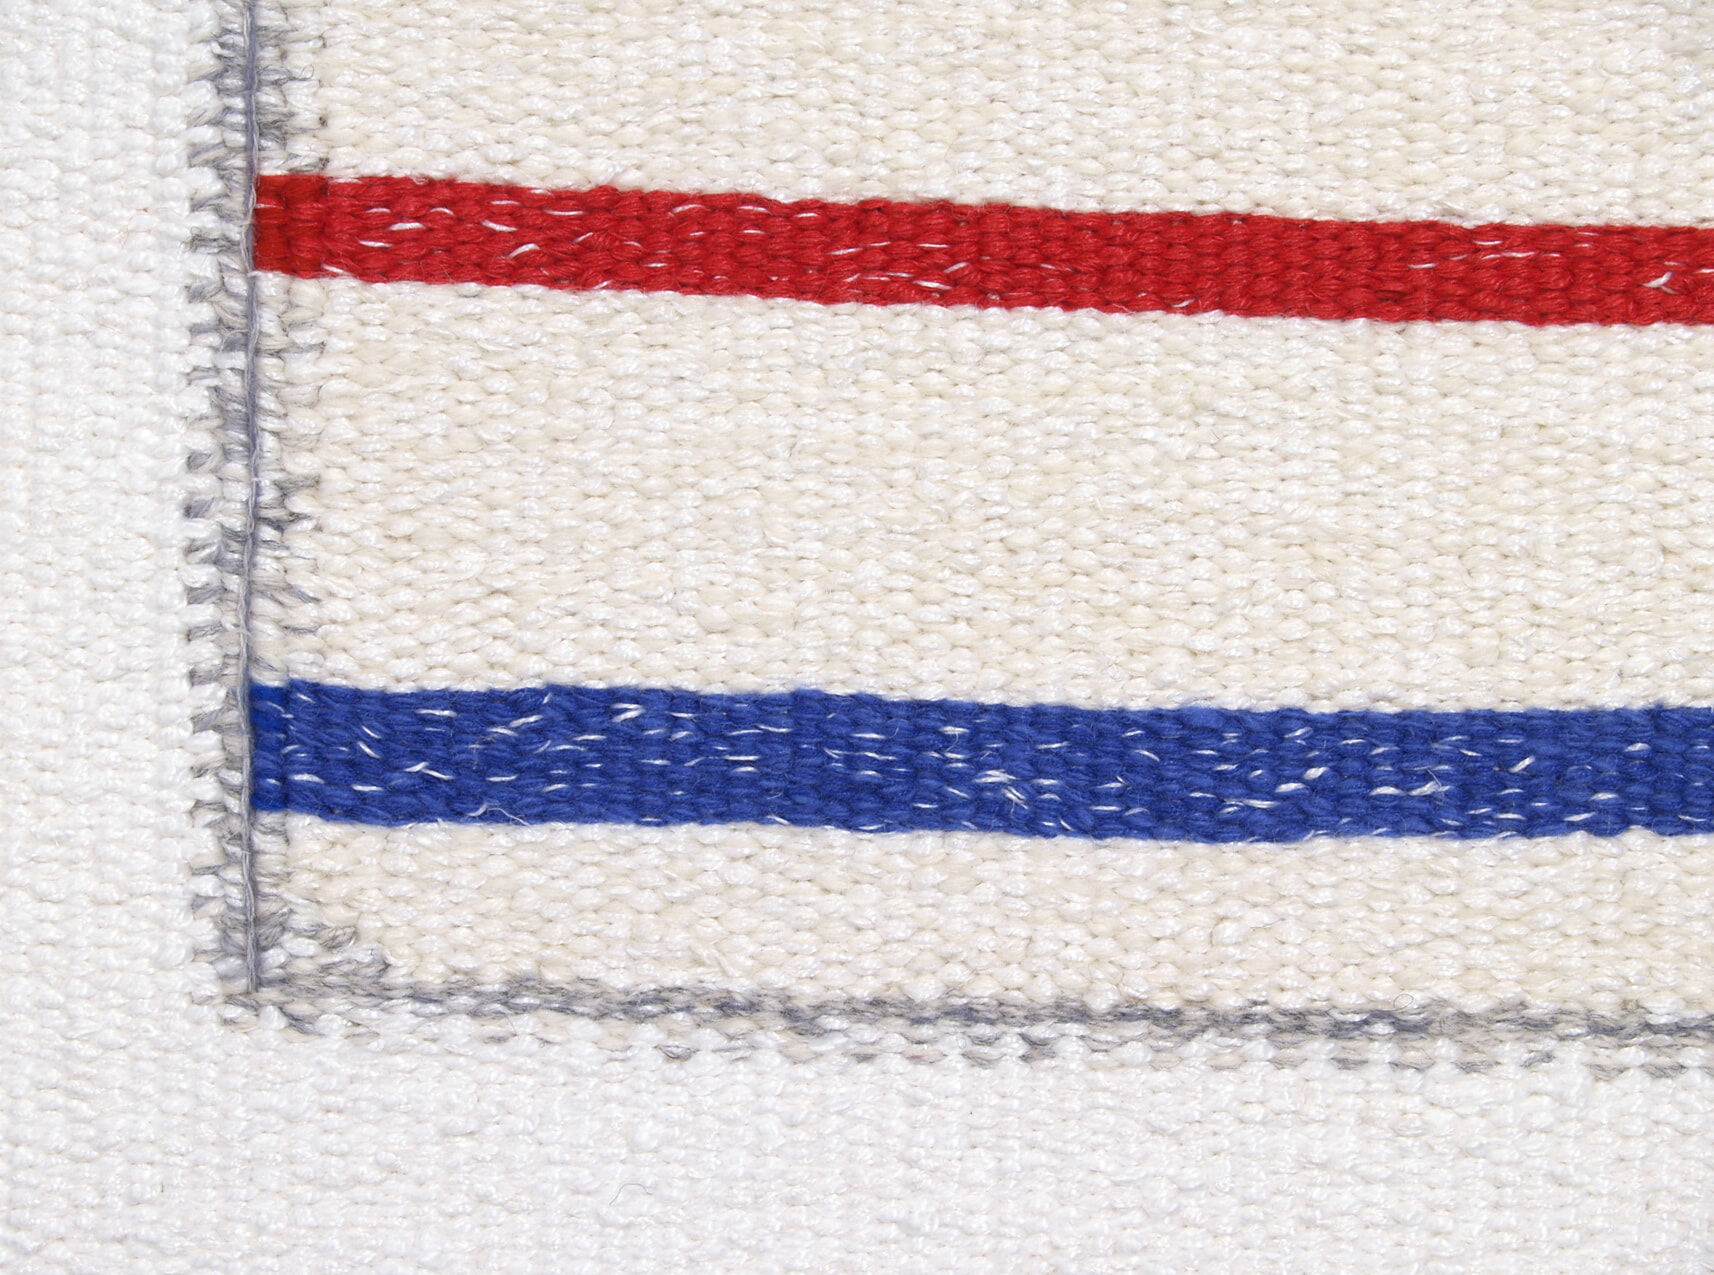 Lawrence Yellow Red Blue stripe detail